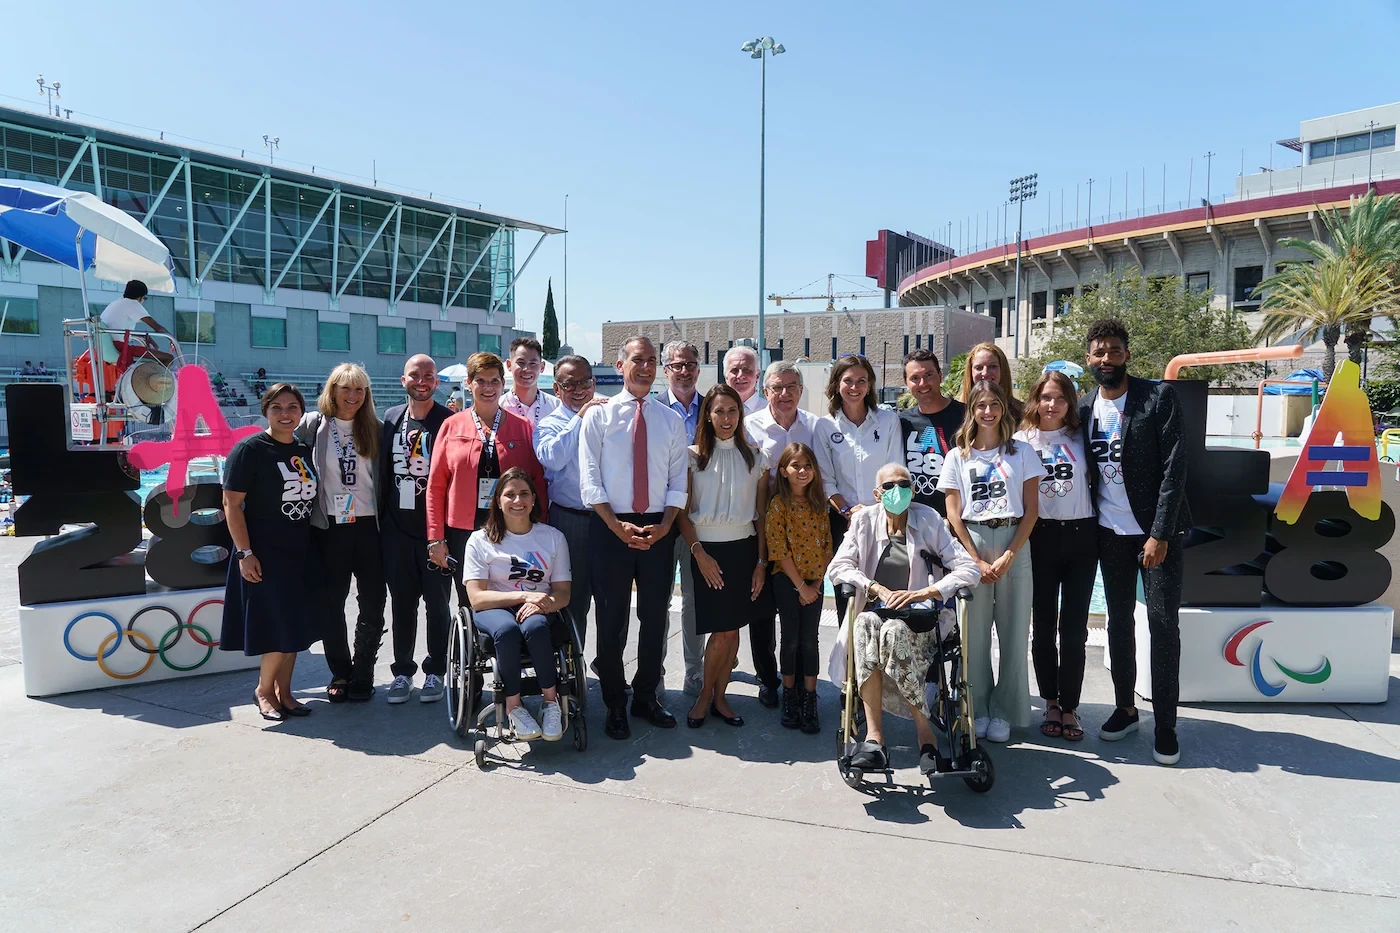 IOC President Thomas Bach joined Los Angeles Mayor Eric Garcetti and several past and present athletes to announce the dates for the 2028 Olympic and Paralympic Games ©IOC